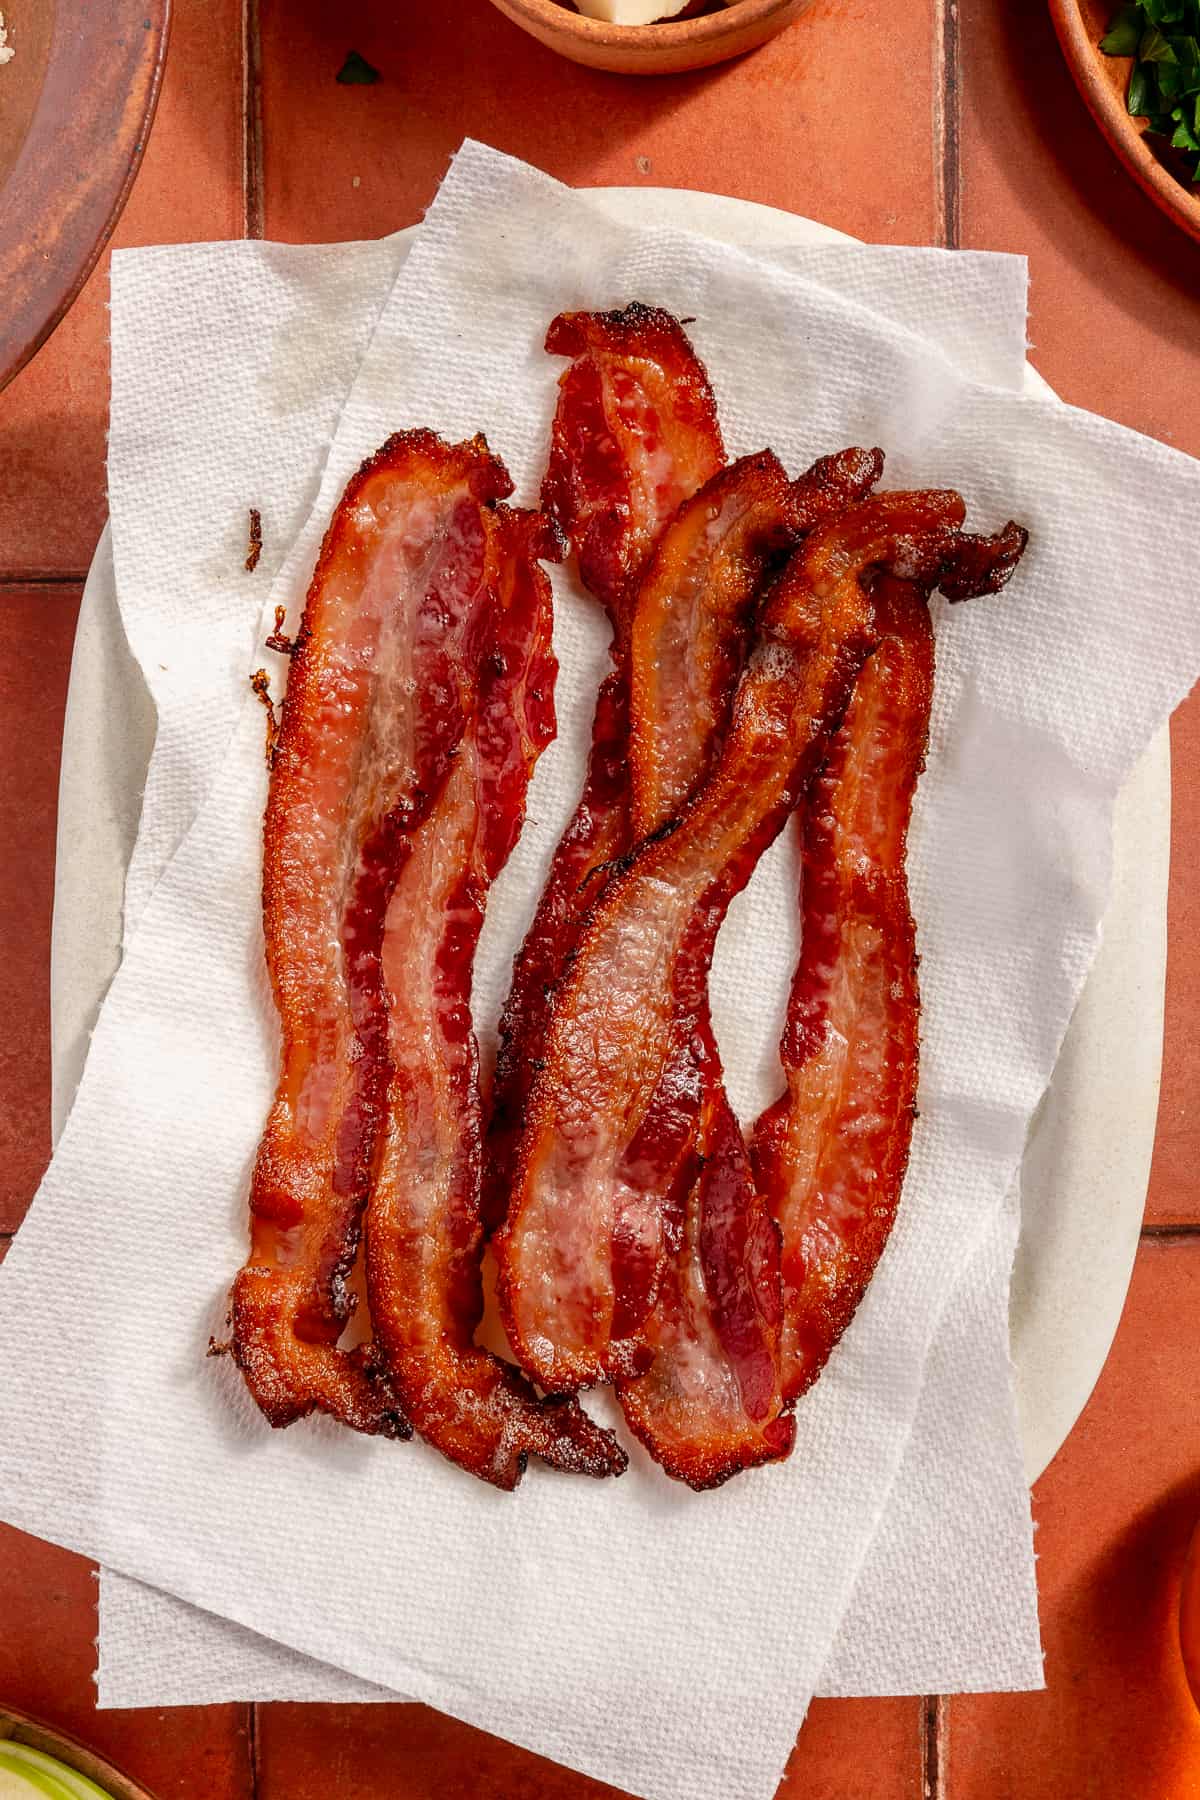 Crisped bacon on paper towel lined plate.